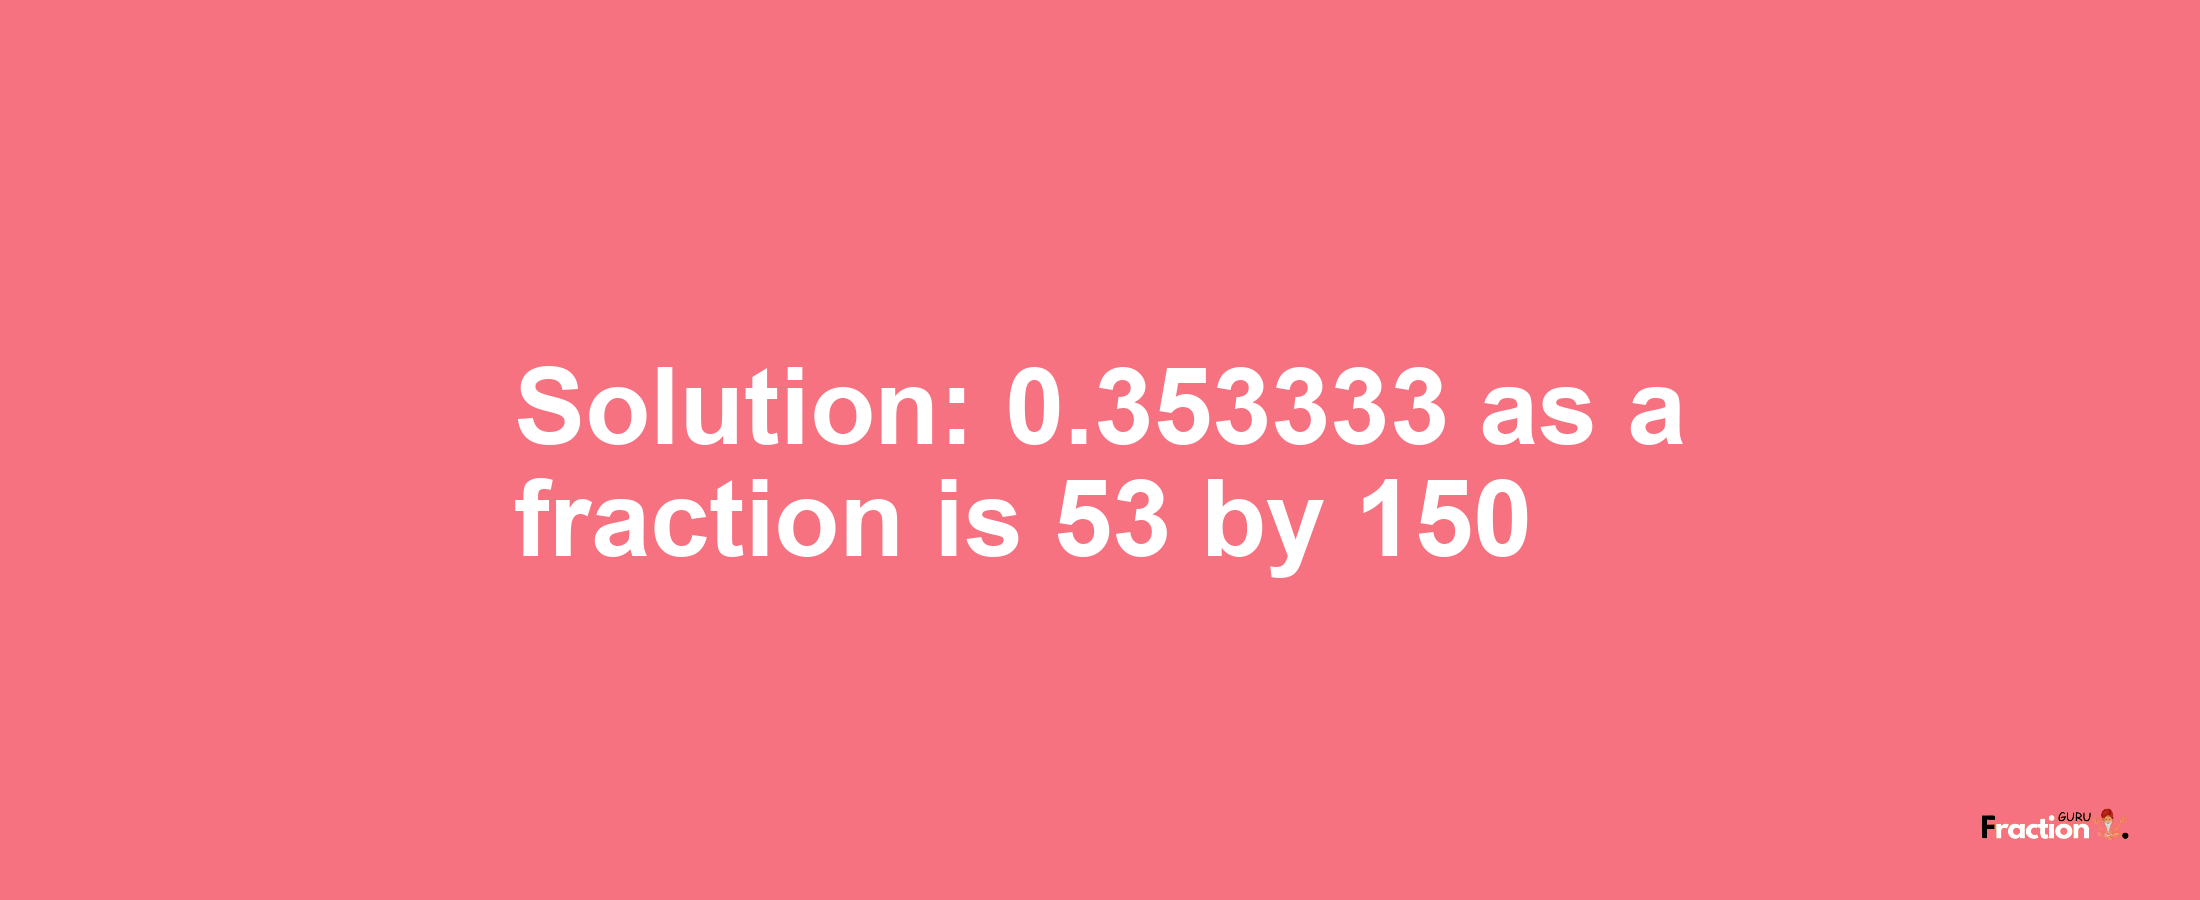 Solution:0.353333 as a fraction is 53/150